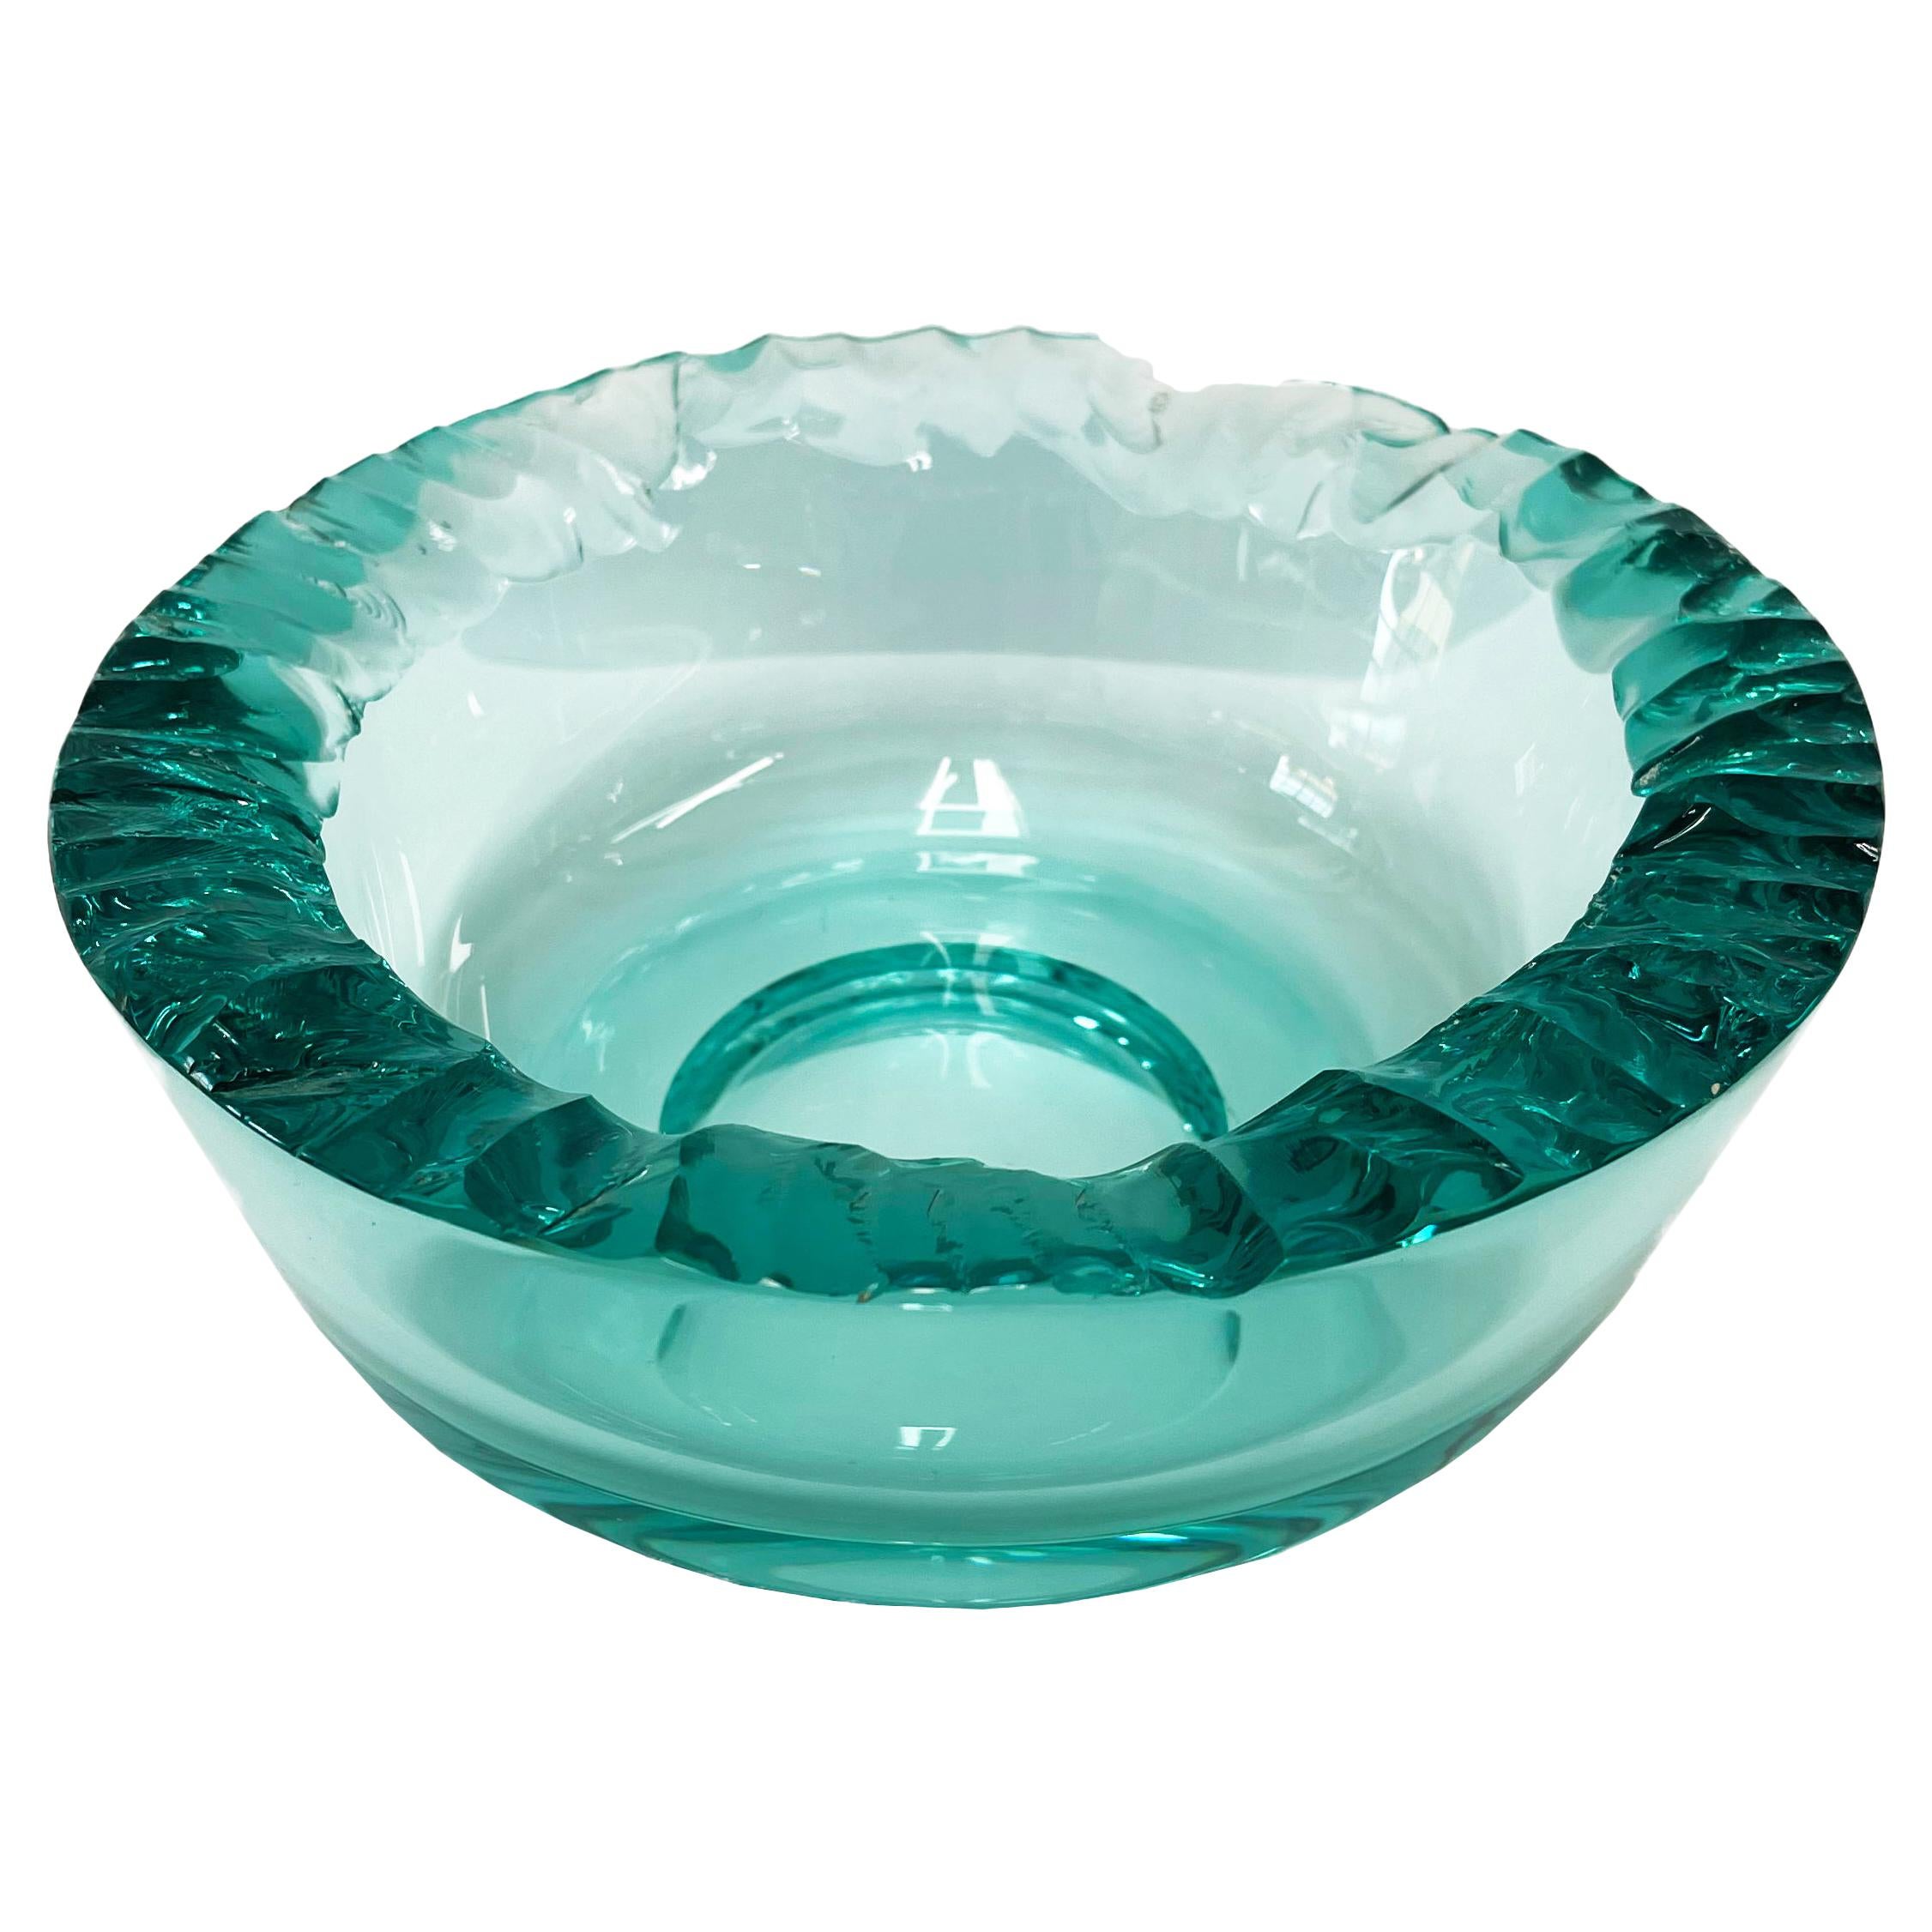 Contemporary by Ghirò Studio Artistic Bowl Hand Crafted Aquamarine Crystal